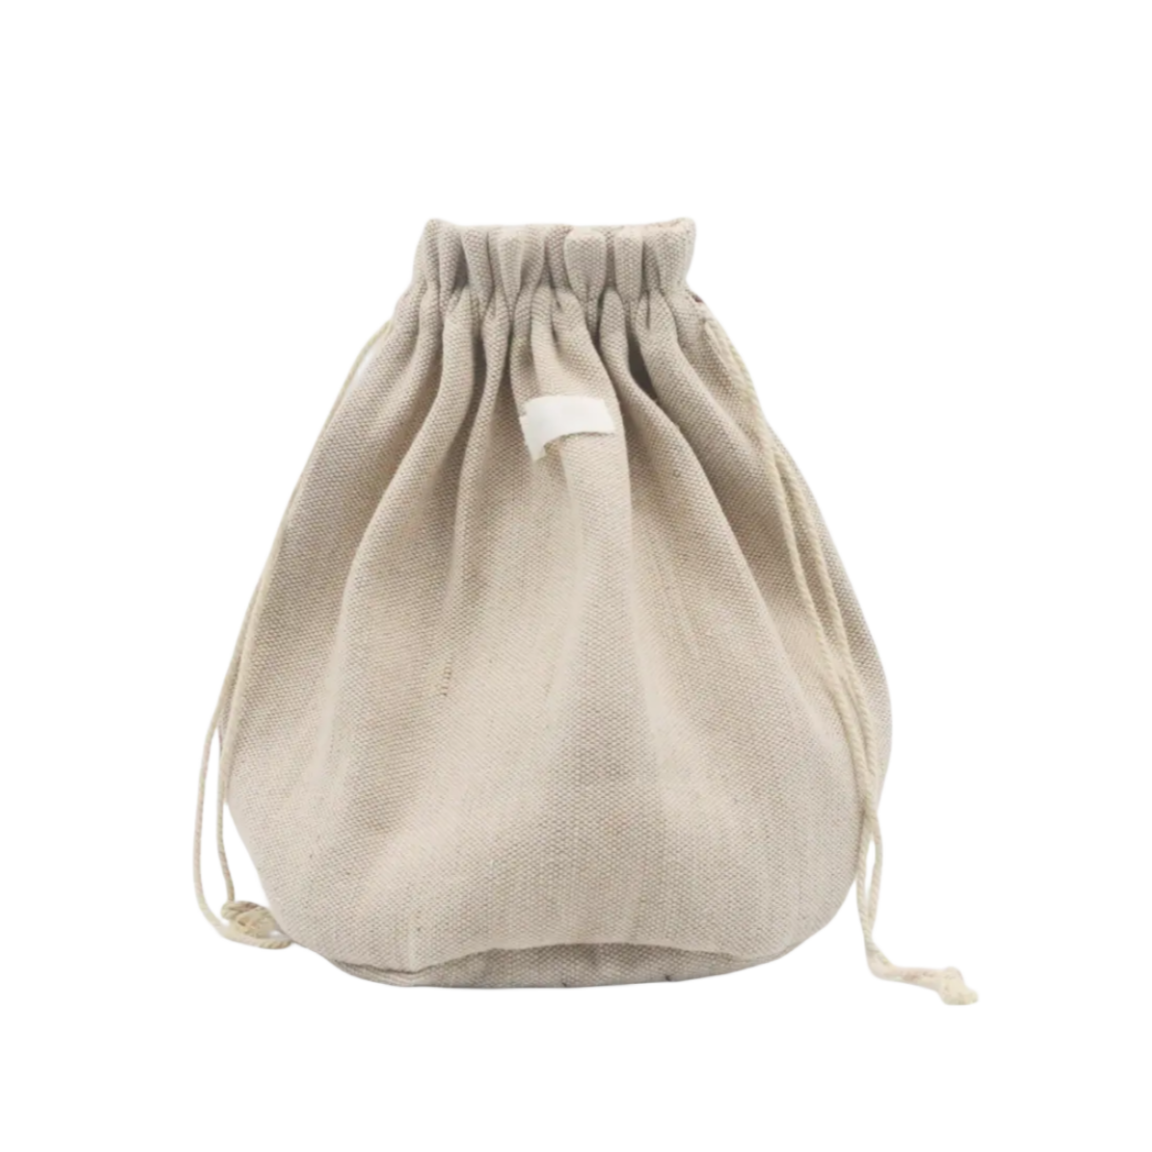 Eco-friendly Cotton and Linen Blended Drawstring Bag Recycled Cotton String Bag Sustainable Fabric Promotional Sting Bag